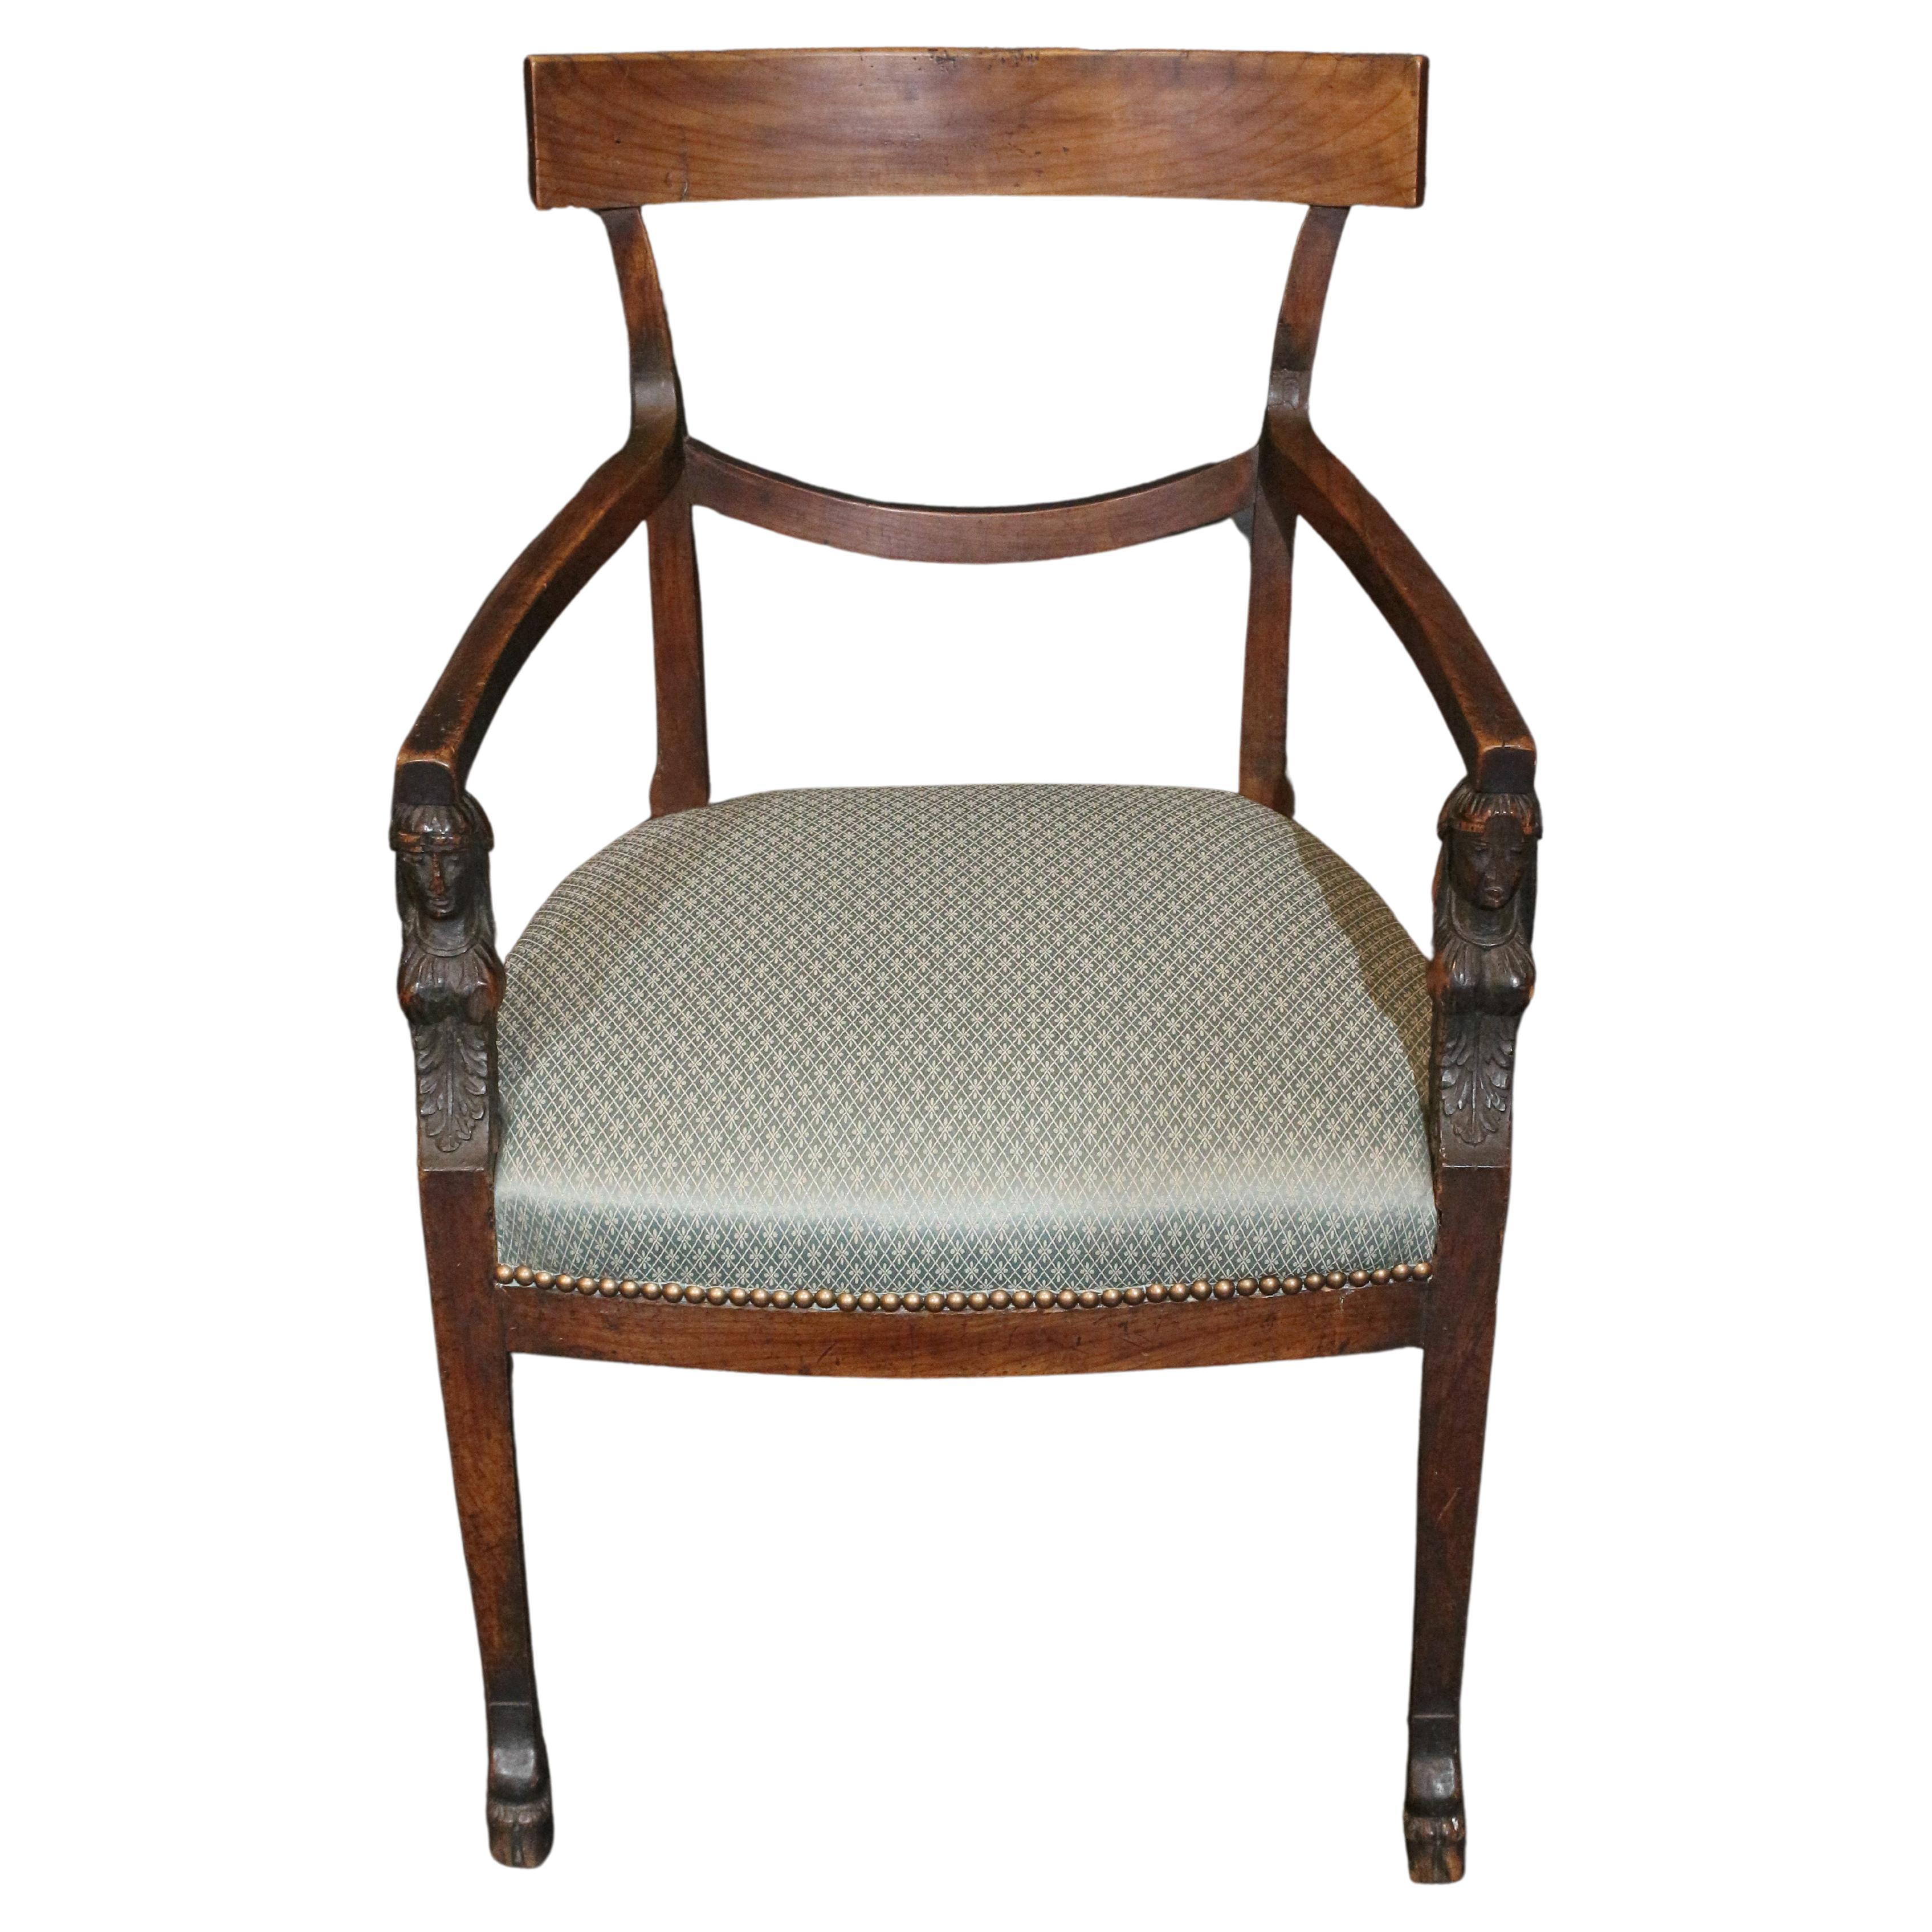 Early 19th Century Empire Period Fauteuil (or Open Arm Chair), French